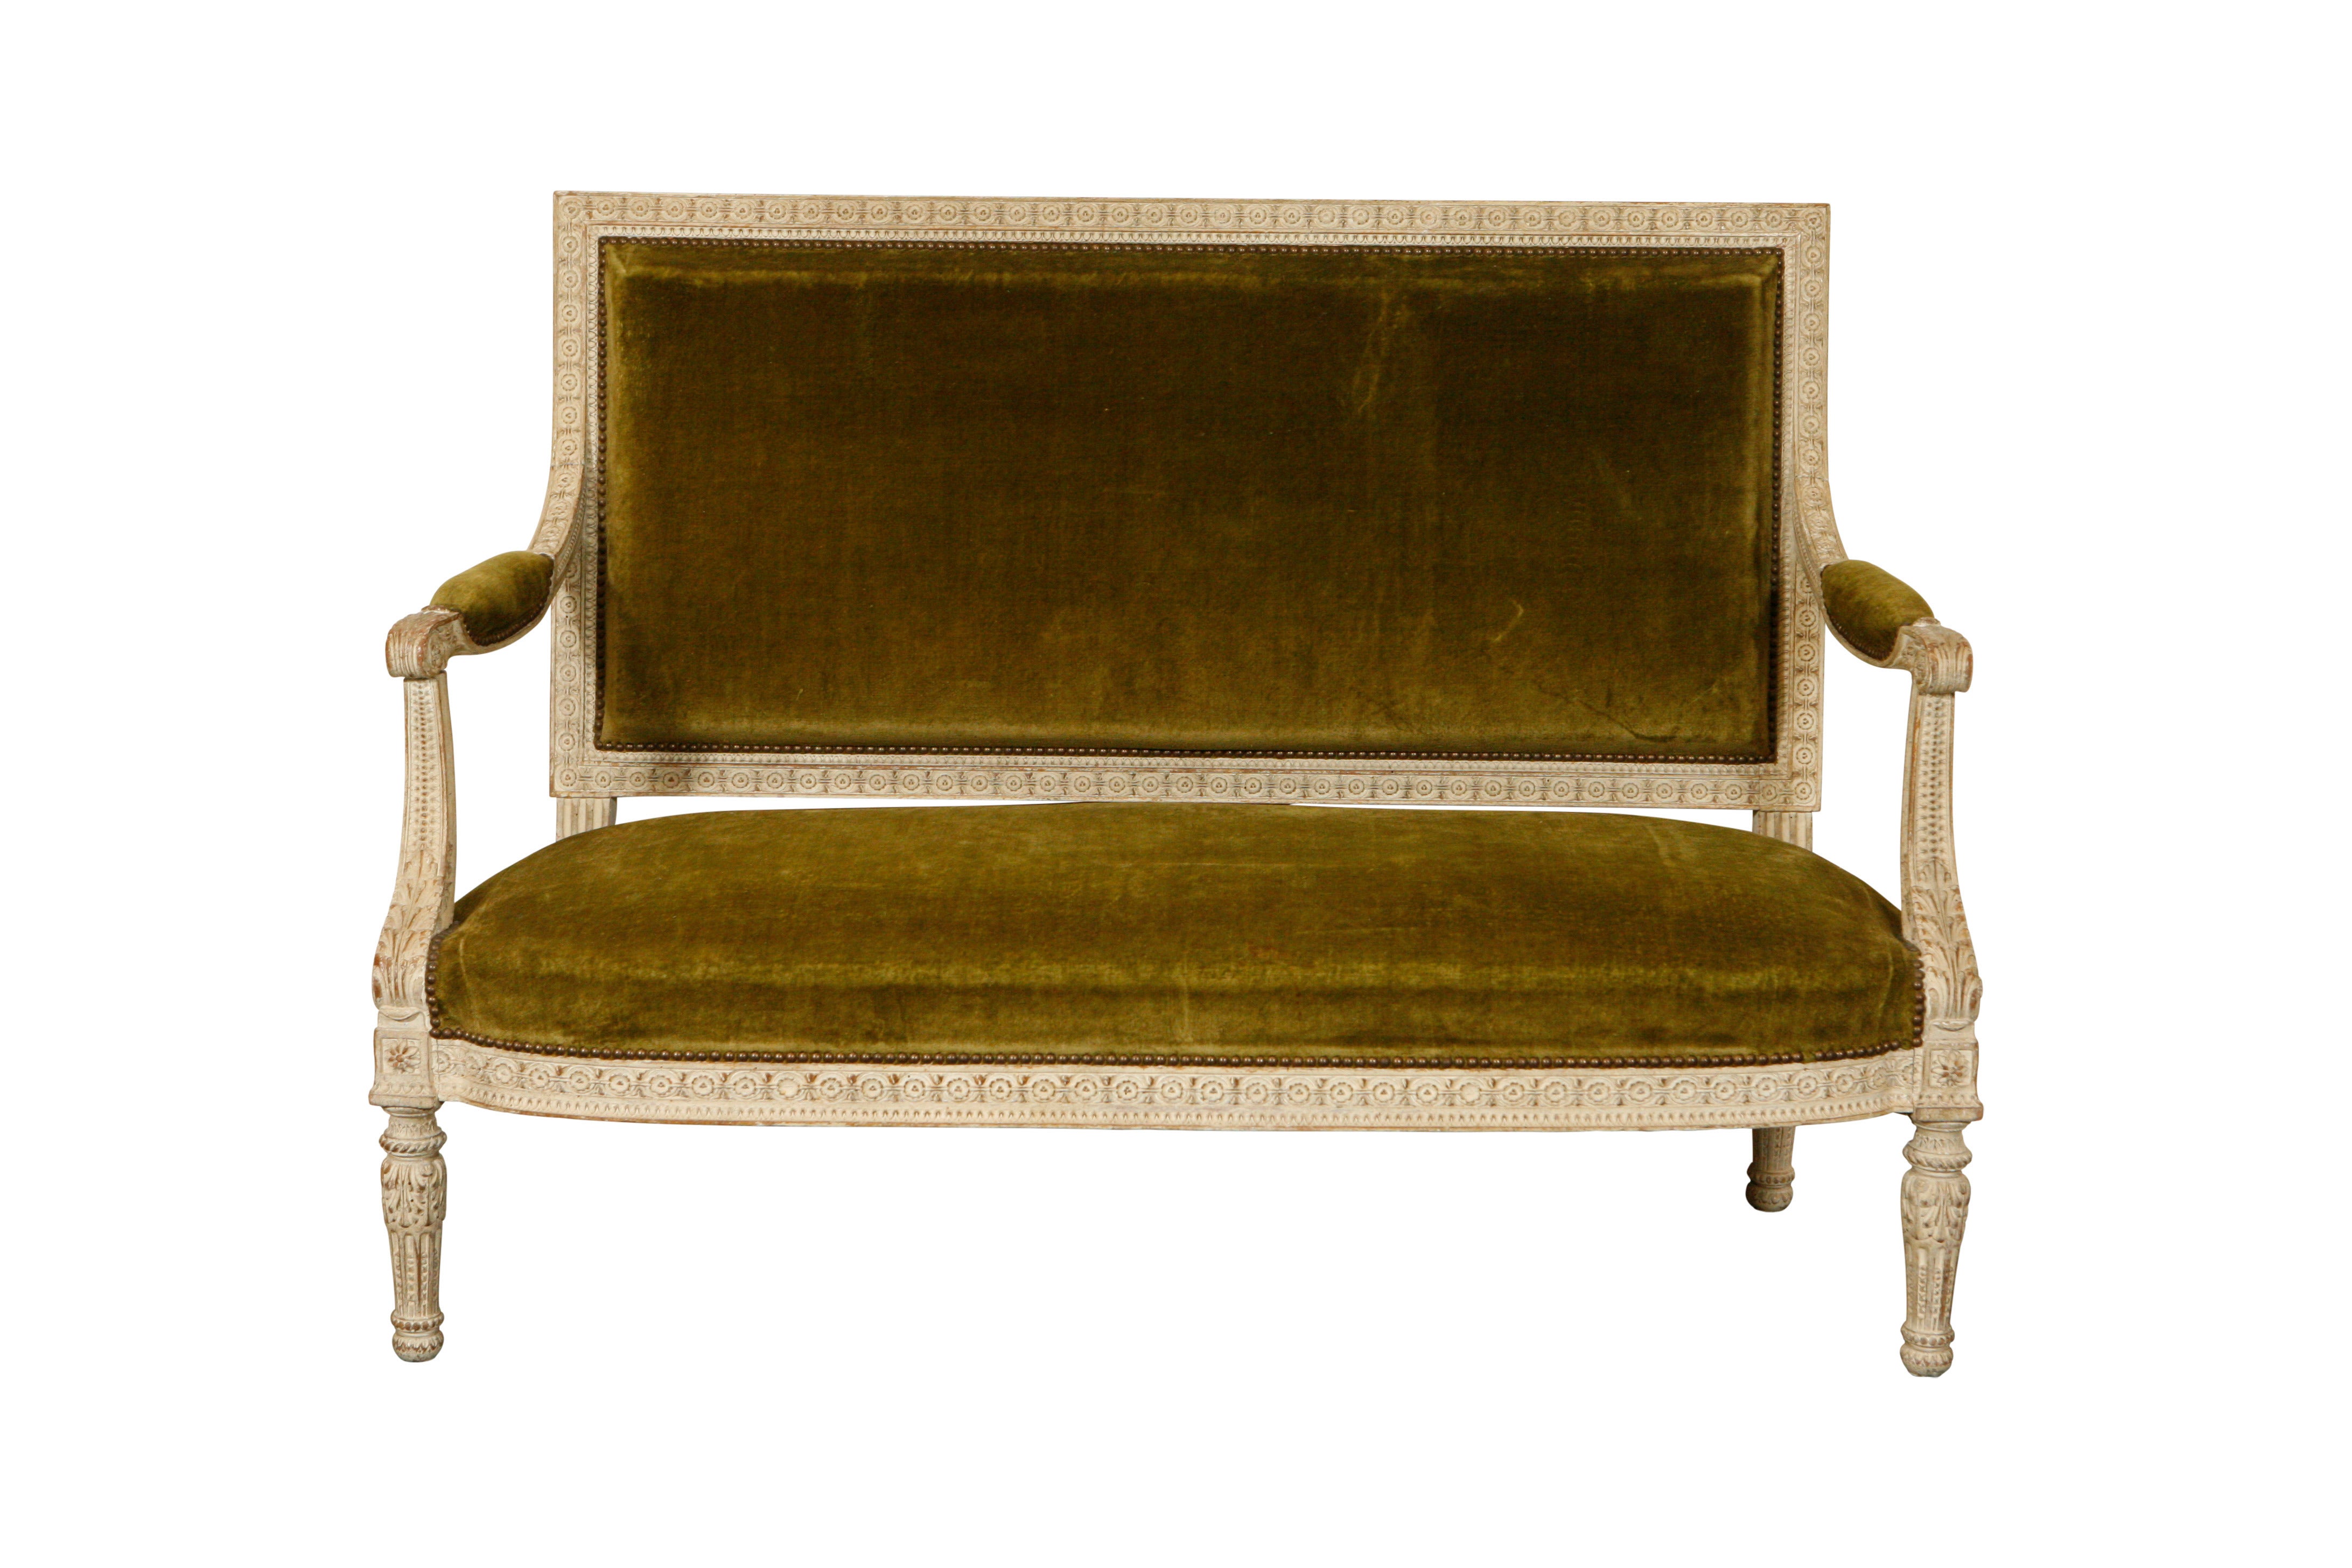 Louis XVI Style Sofa Modeled after Marie Antoinette Furniture